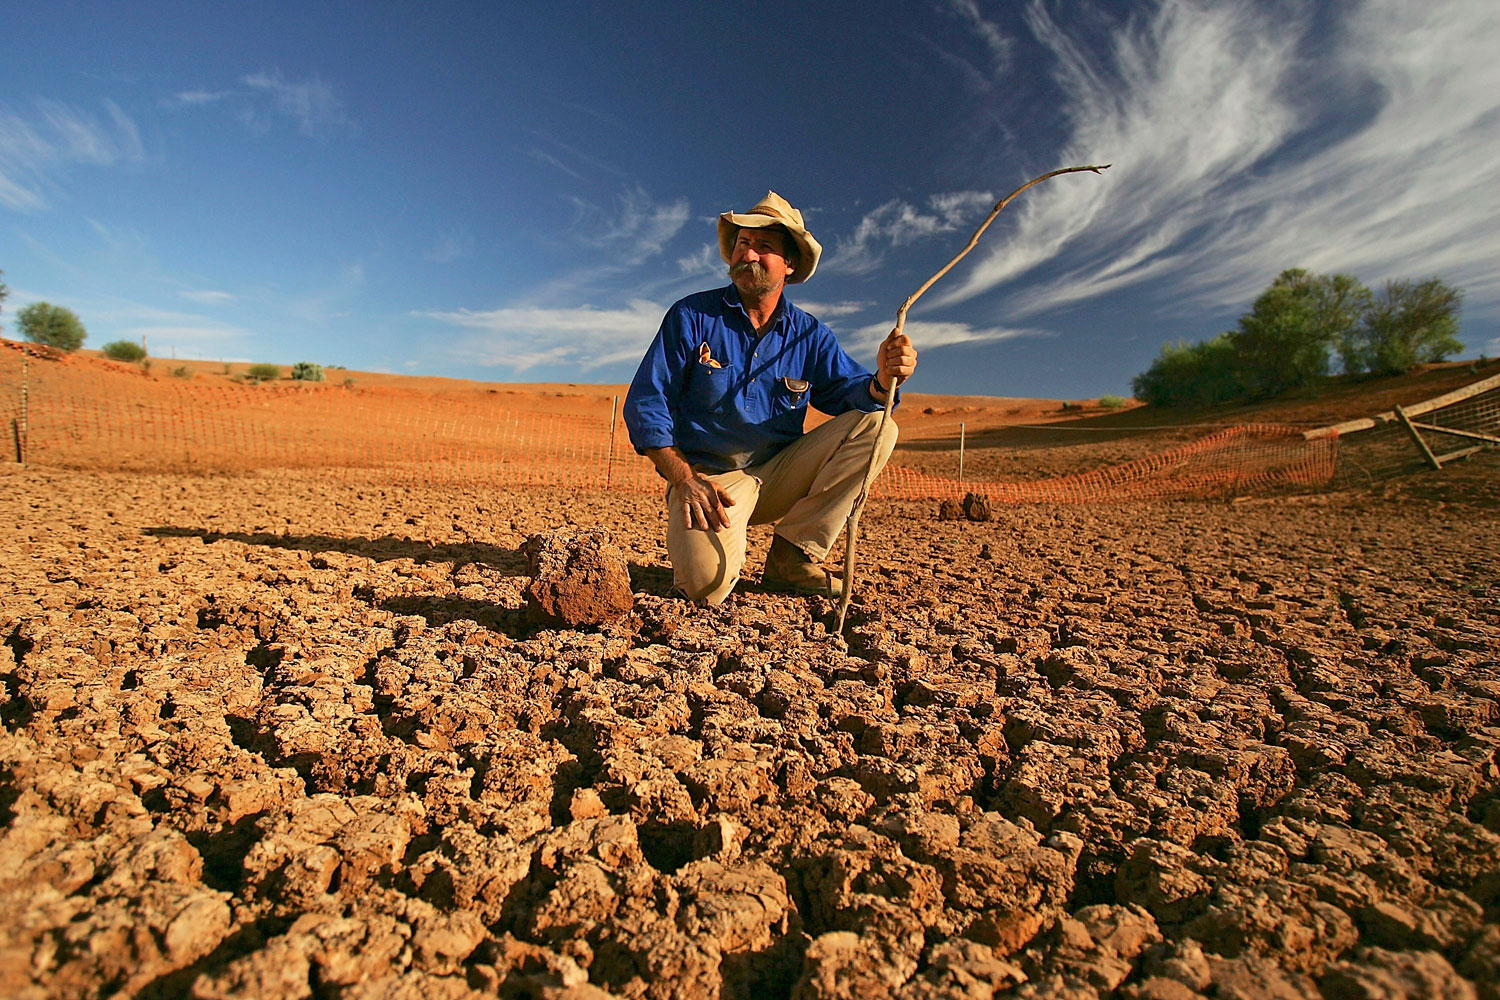 Stockman Gordon Litchfield surveys the bottom of a dry dam on his property on June 7, 2005 in Leigh Creek, Australia. Australia is enduring its worst drought in decades in part due to the increasing temperatures and the El Nino weather phenomenon.